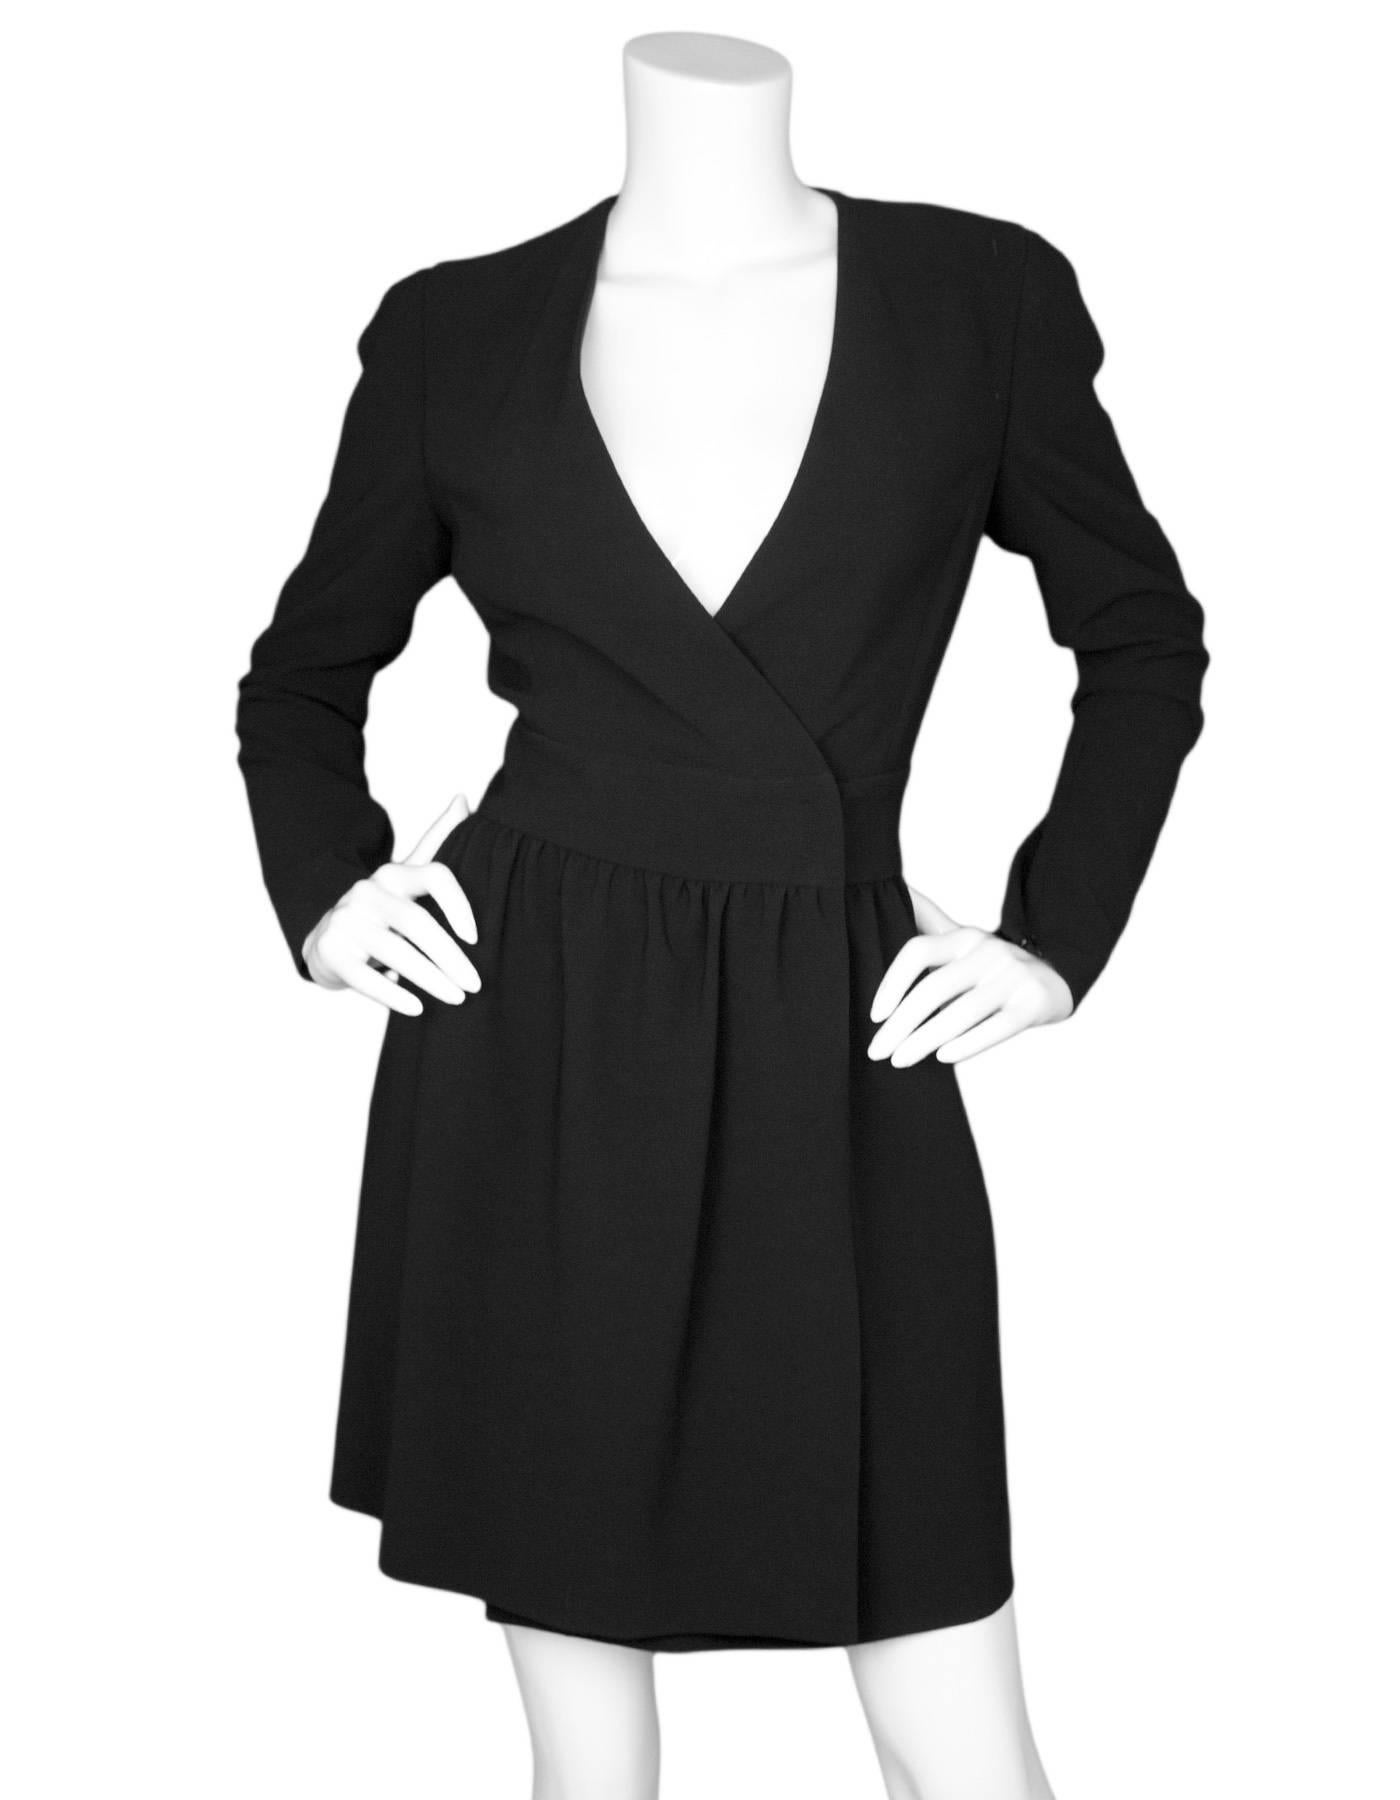 Celine Black Wrap Dress Sz FR40

Made In: France
Color: Black
Composition: 70% triacetate, 30% silk
Closure/Opening: Front hidden hook and eye and button closure at waist
Overall Condition: Excellent pre-owned condition
Marked Size: FR40/US8
Bust: